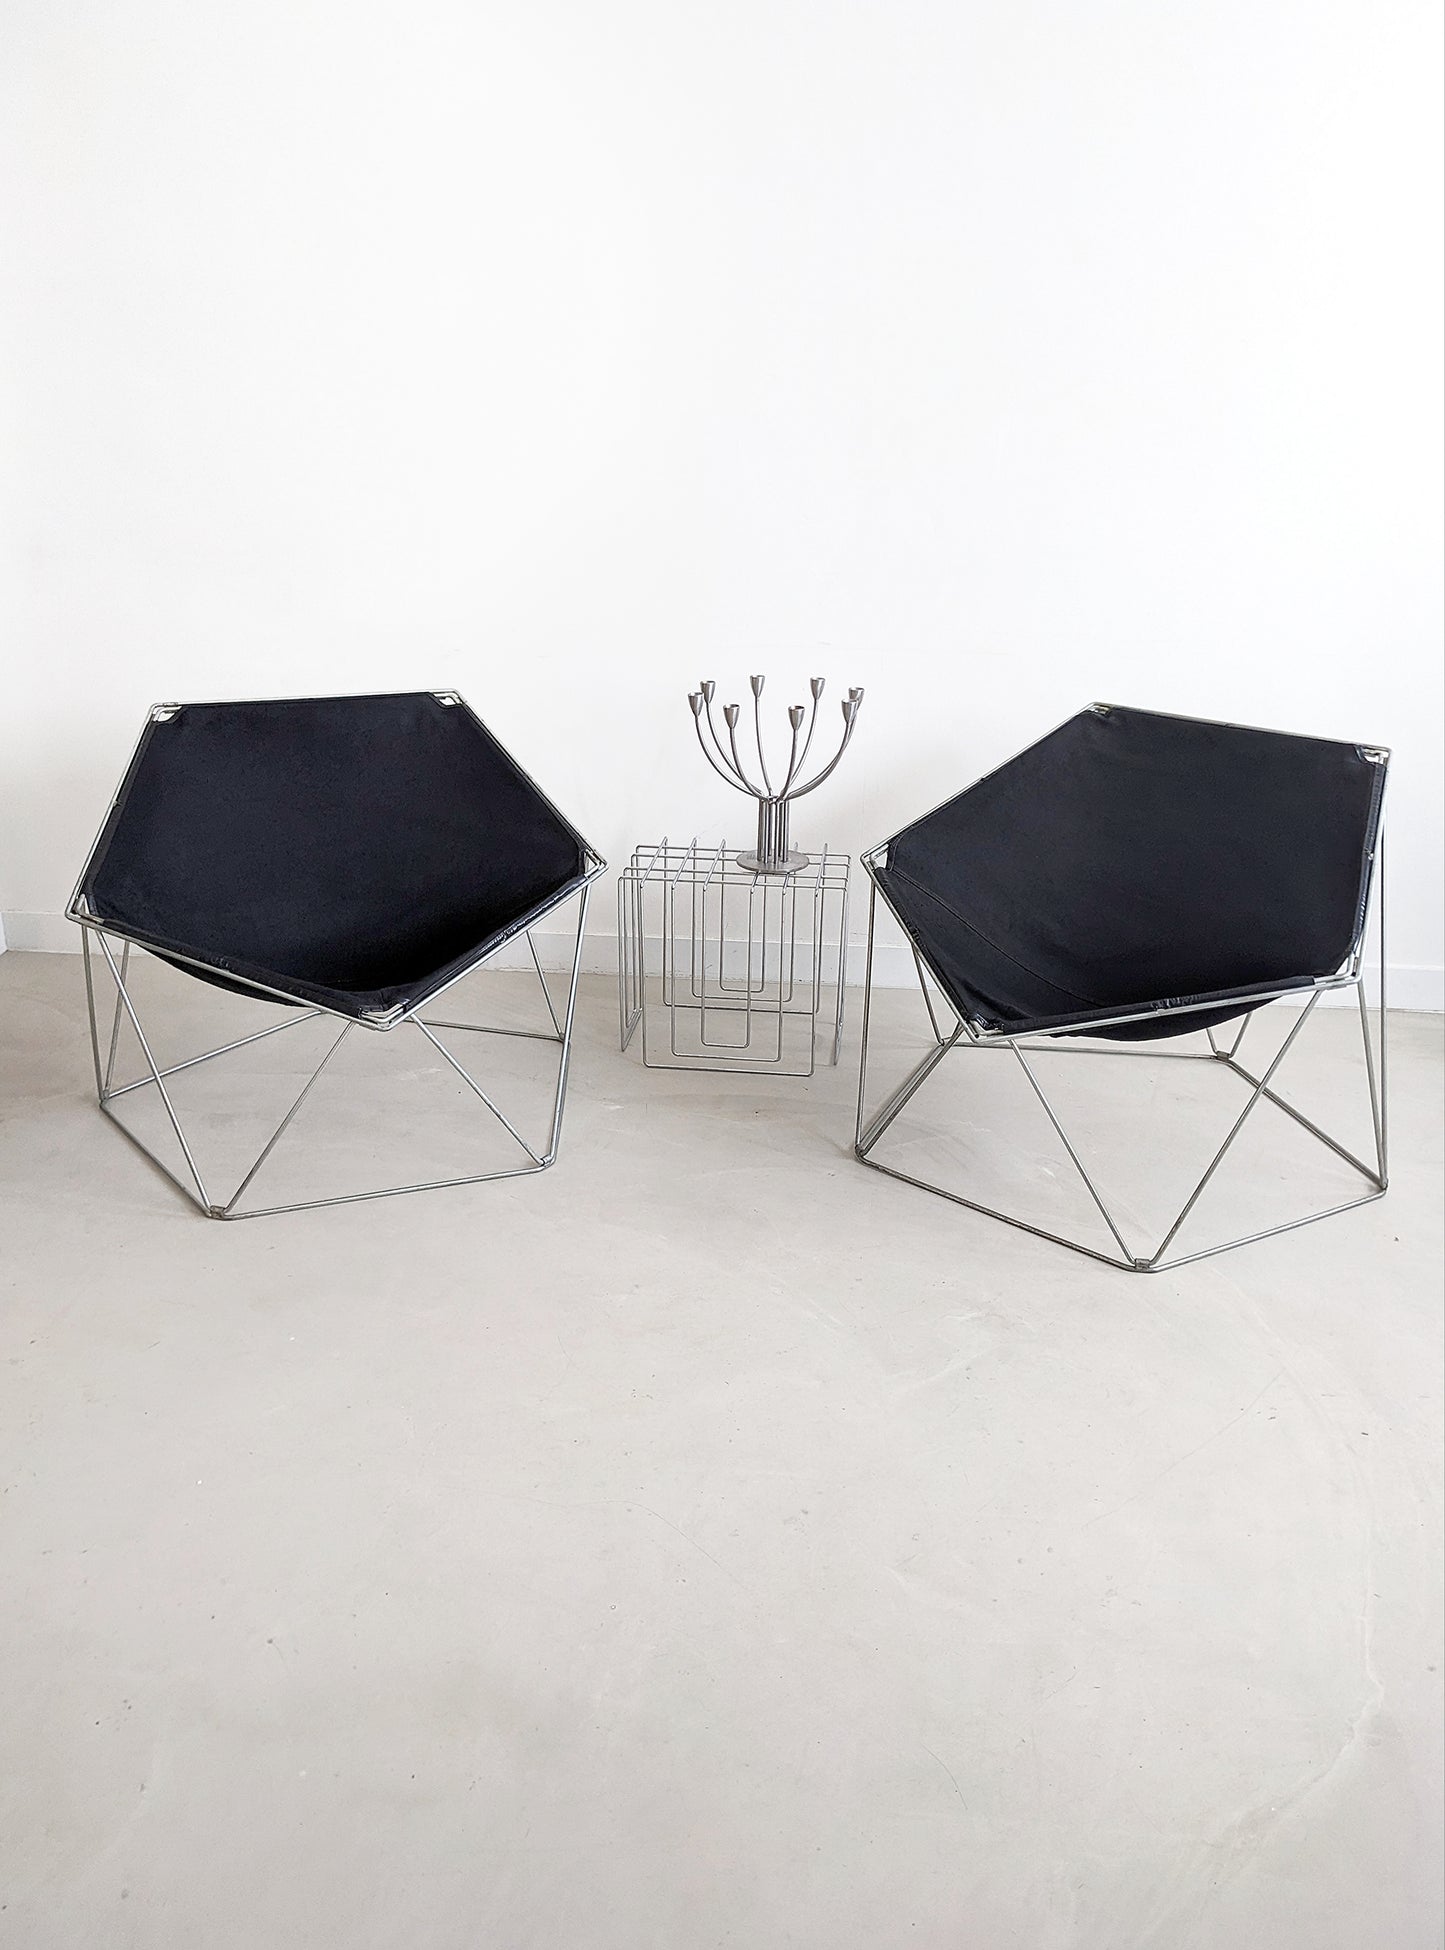 Set of 2 'Penta' Chairs by Jean-Paul Barry & Kim Moltzer for Bofinger 1960's